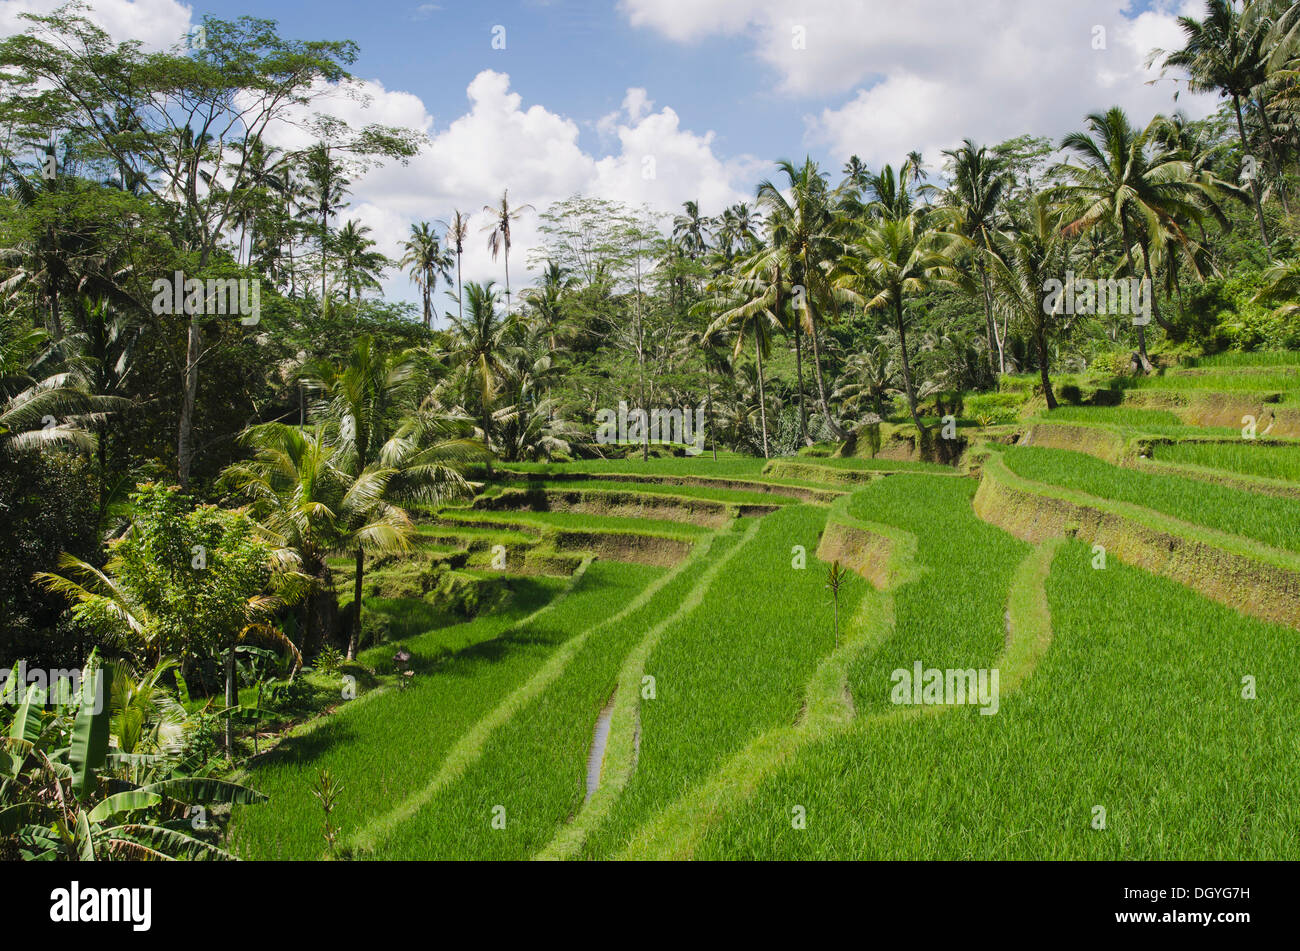 Rice terrace landscape with coconut trees, bei Gunung Kawi, Tampaksiring, Bali, Indonesia Stock Photo